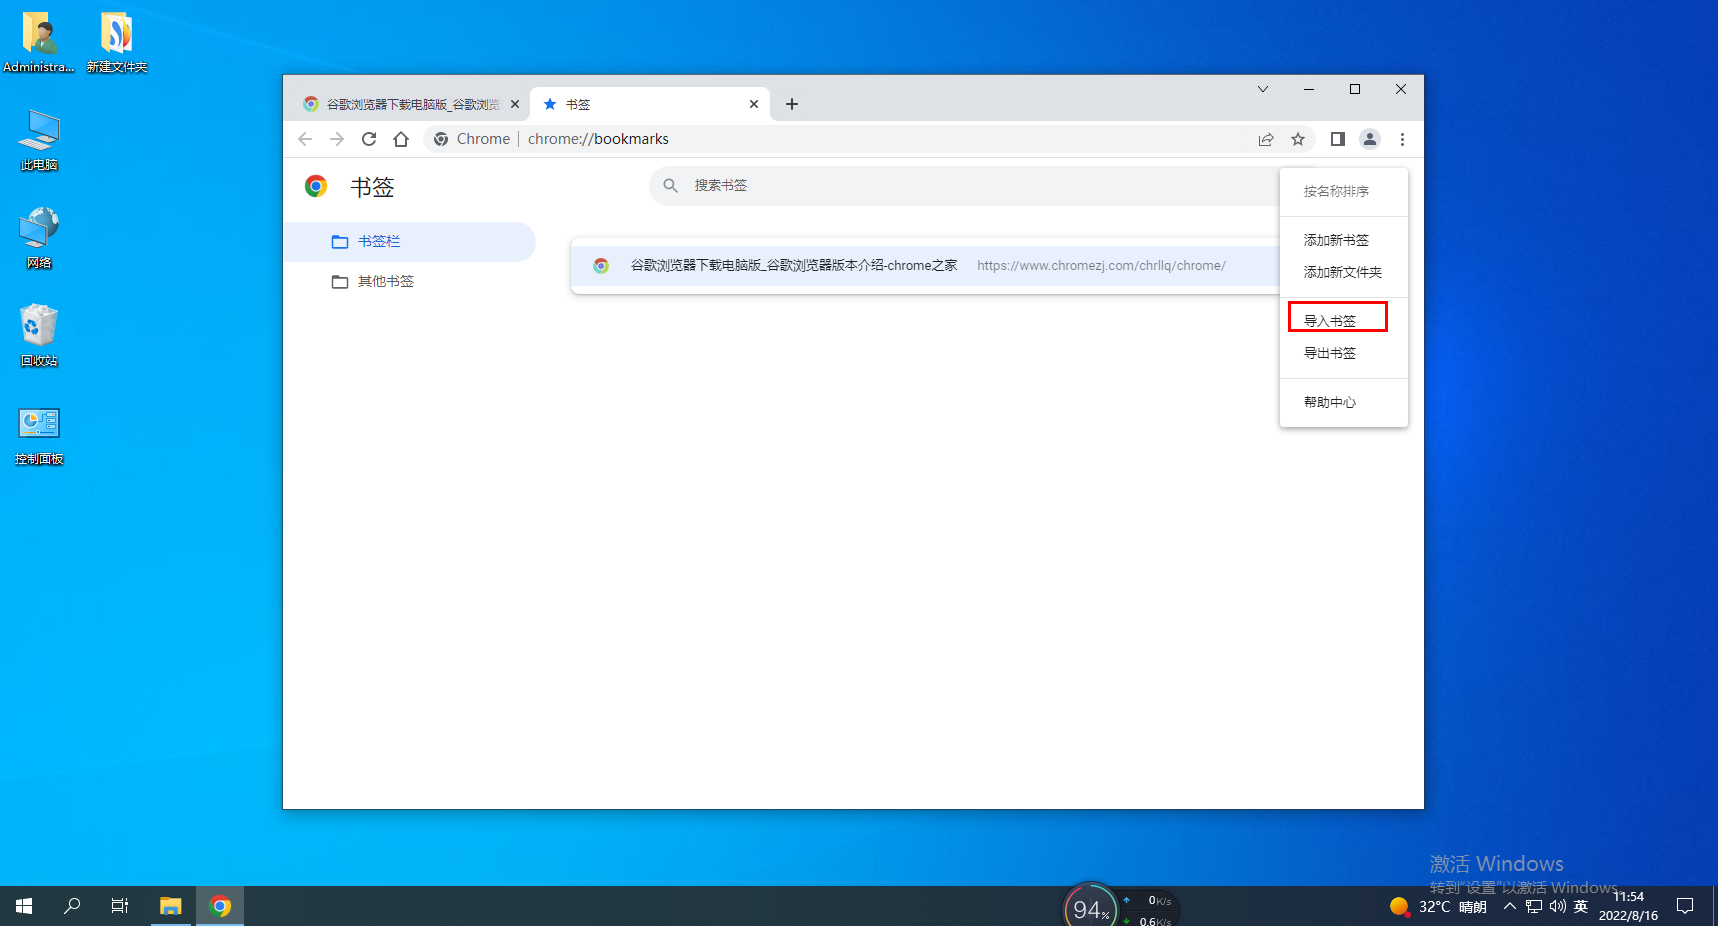 How to export bookmarks from Google Chrome